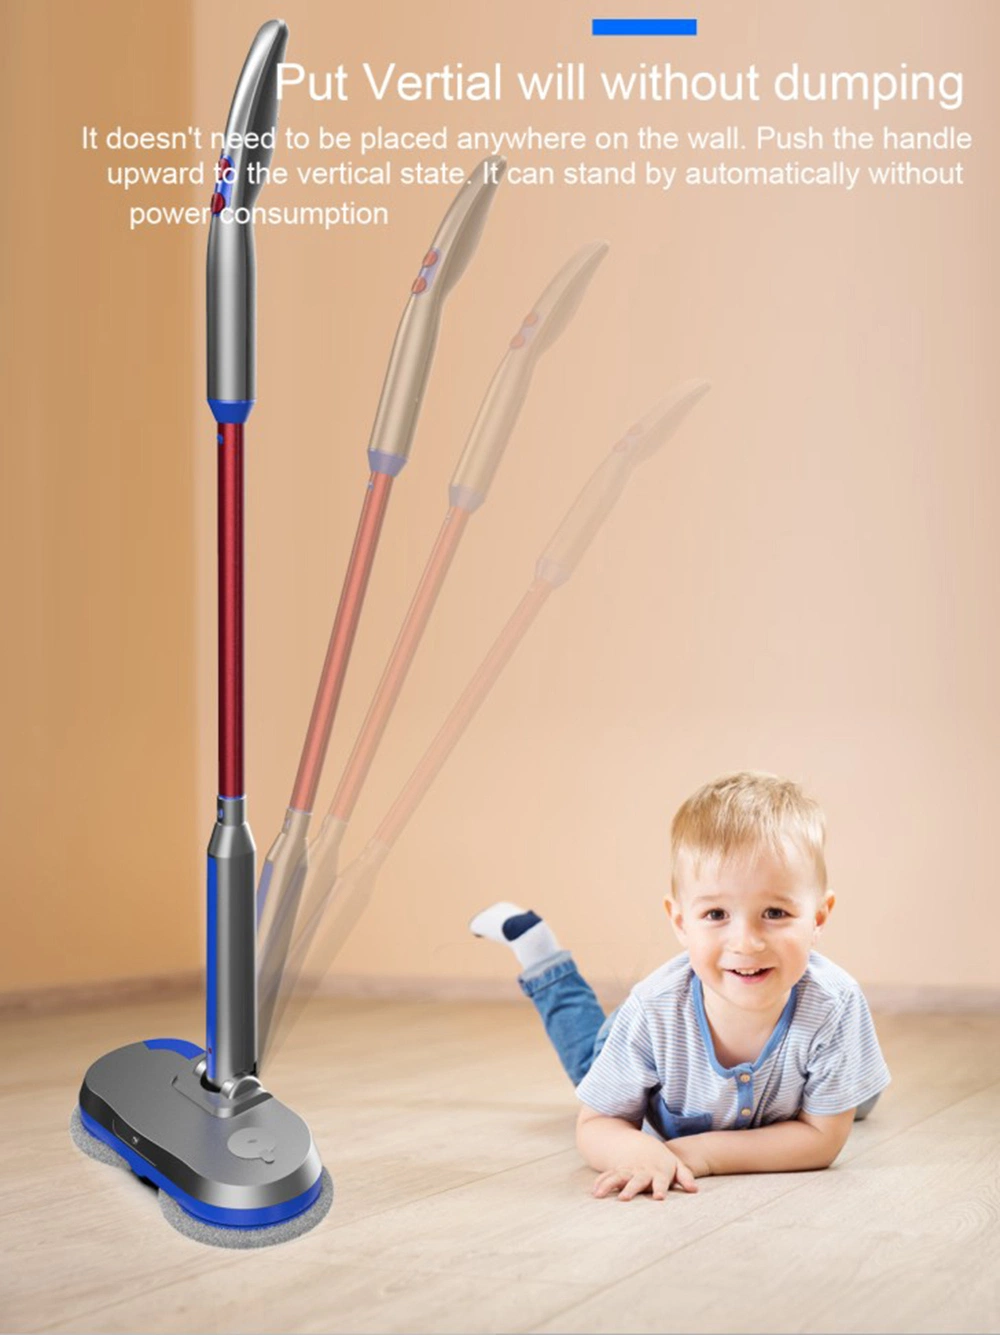 Electronic Dual Spin Mop and Polisher, Water Spray, Adjustable Height, LED Lights, Reusable Microfiber Pads for All Hard Surfaces